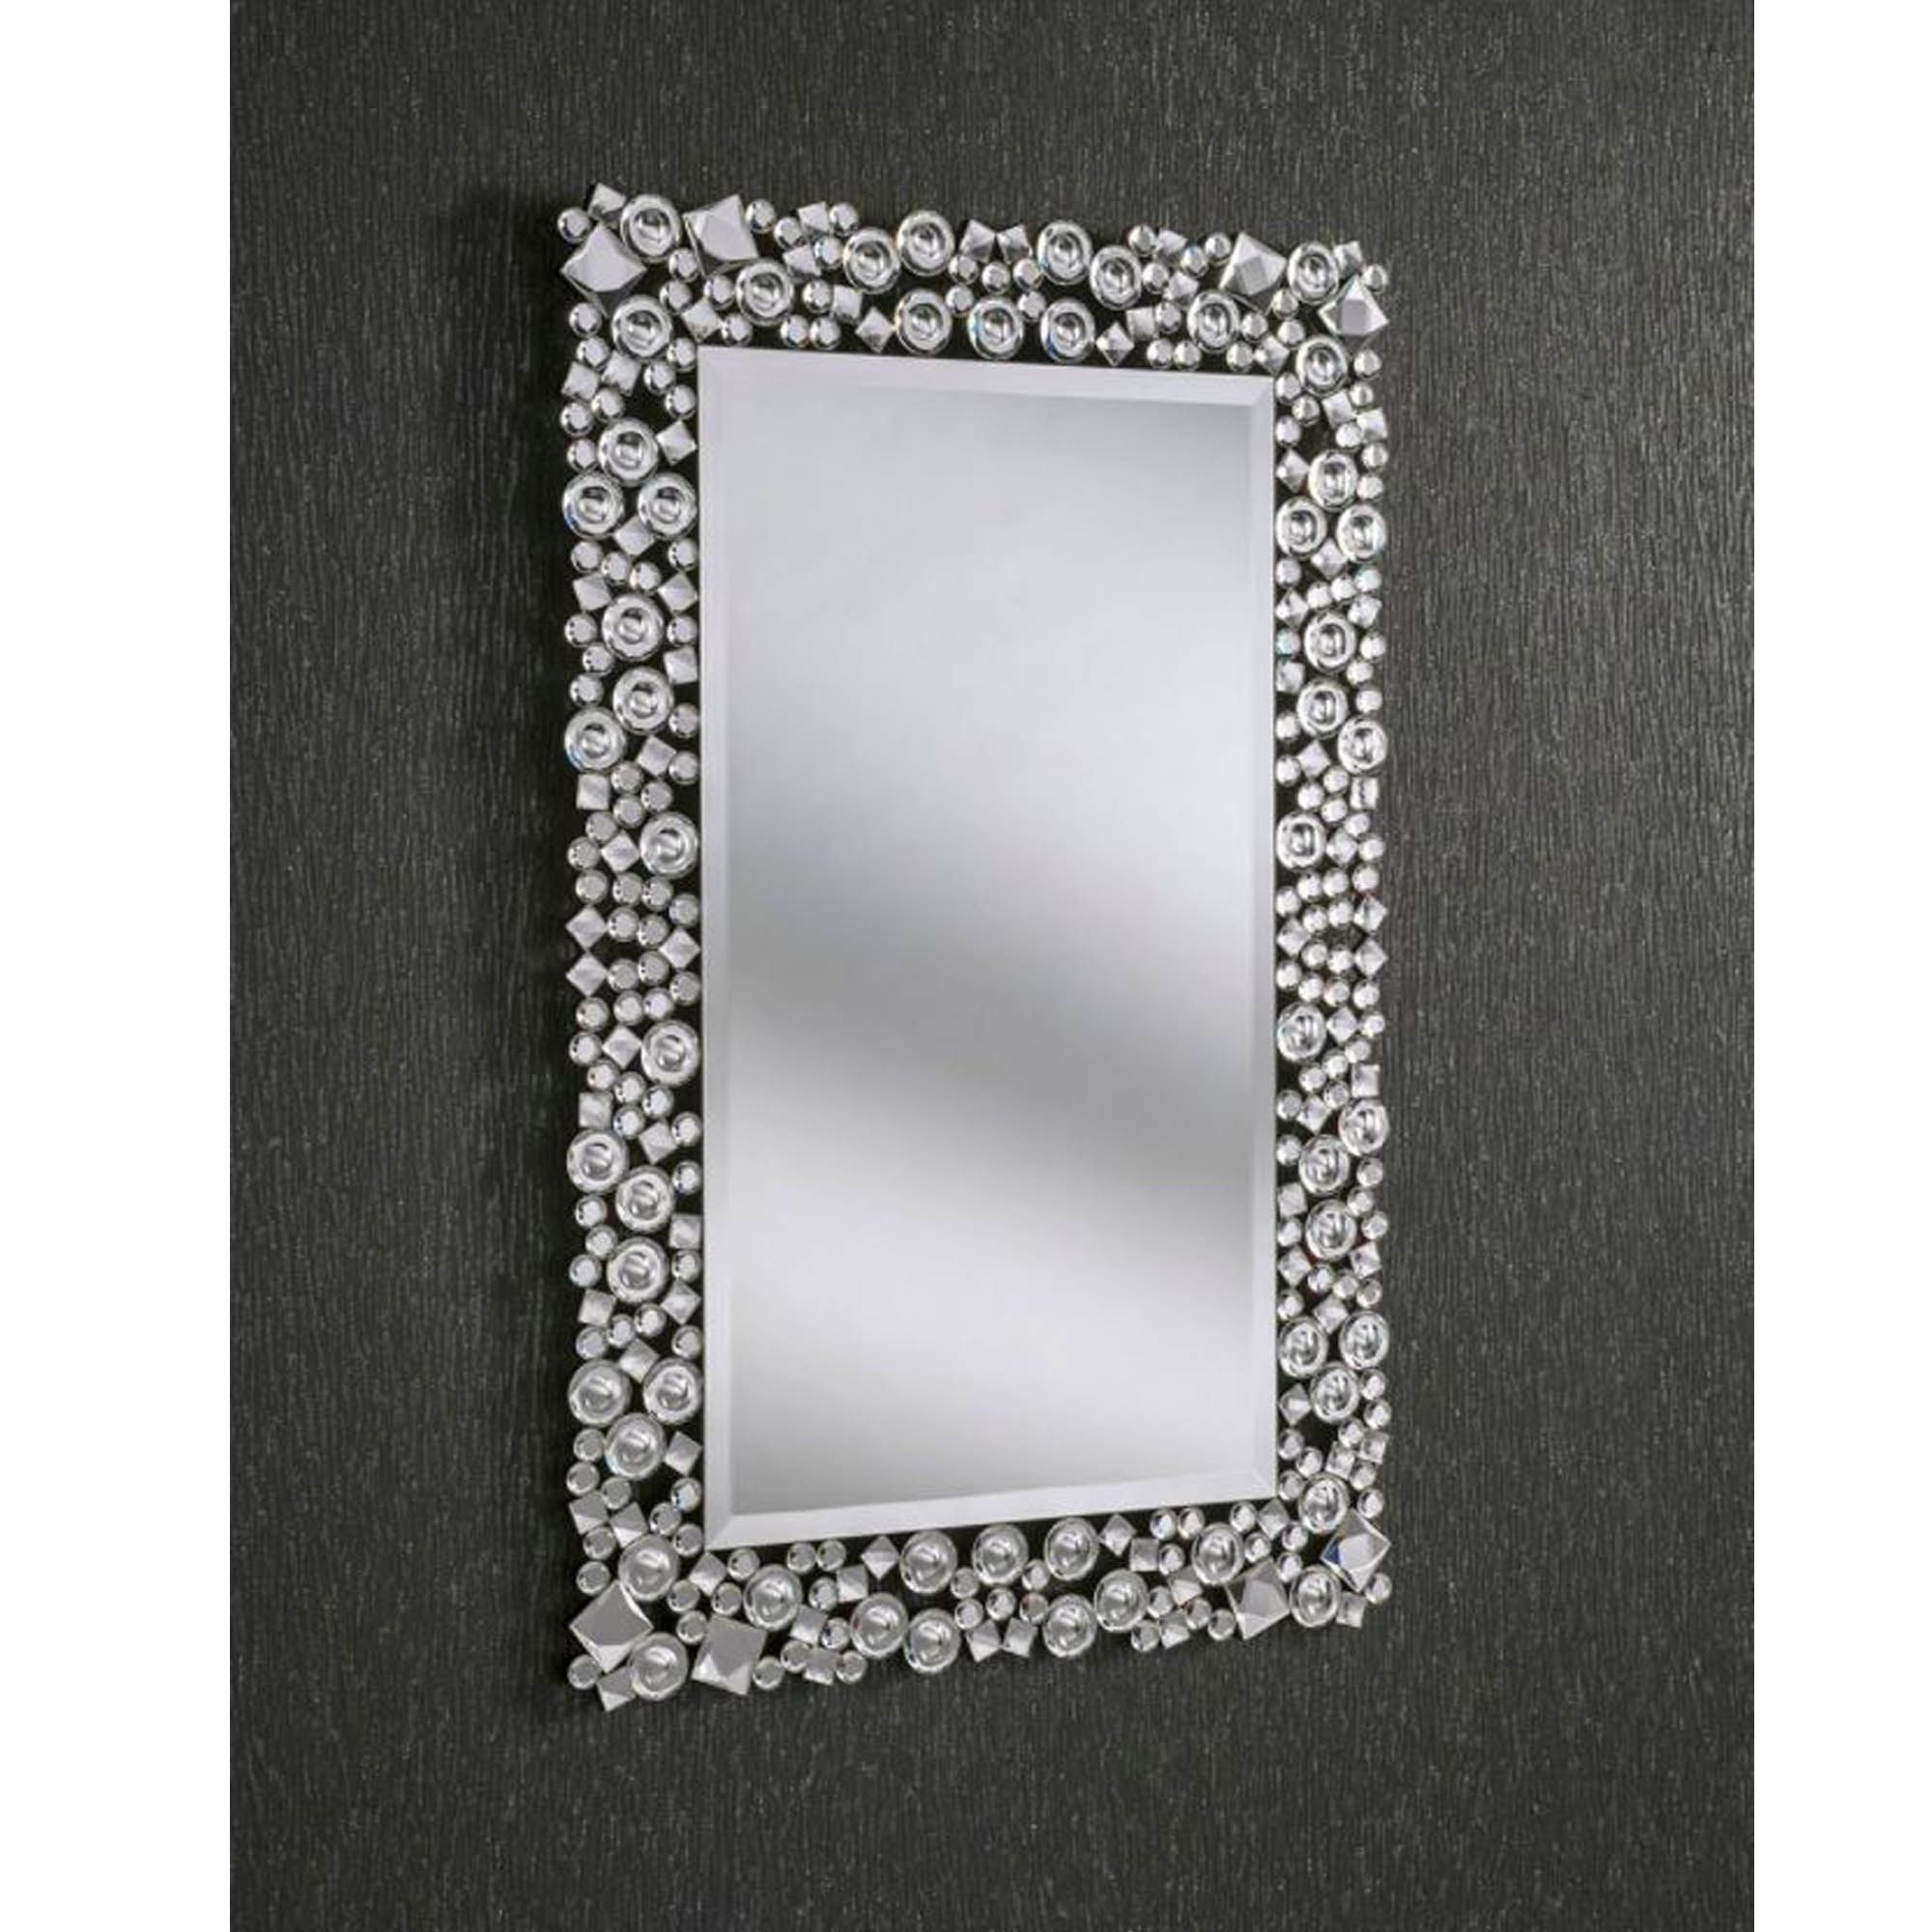 Decorative Crystal Rectangular Wall Mirror | Homesdirect365 Intended For Rectangular Grid Wall Mirrors (View 9 of 15)